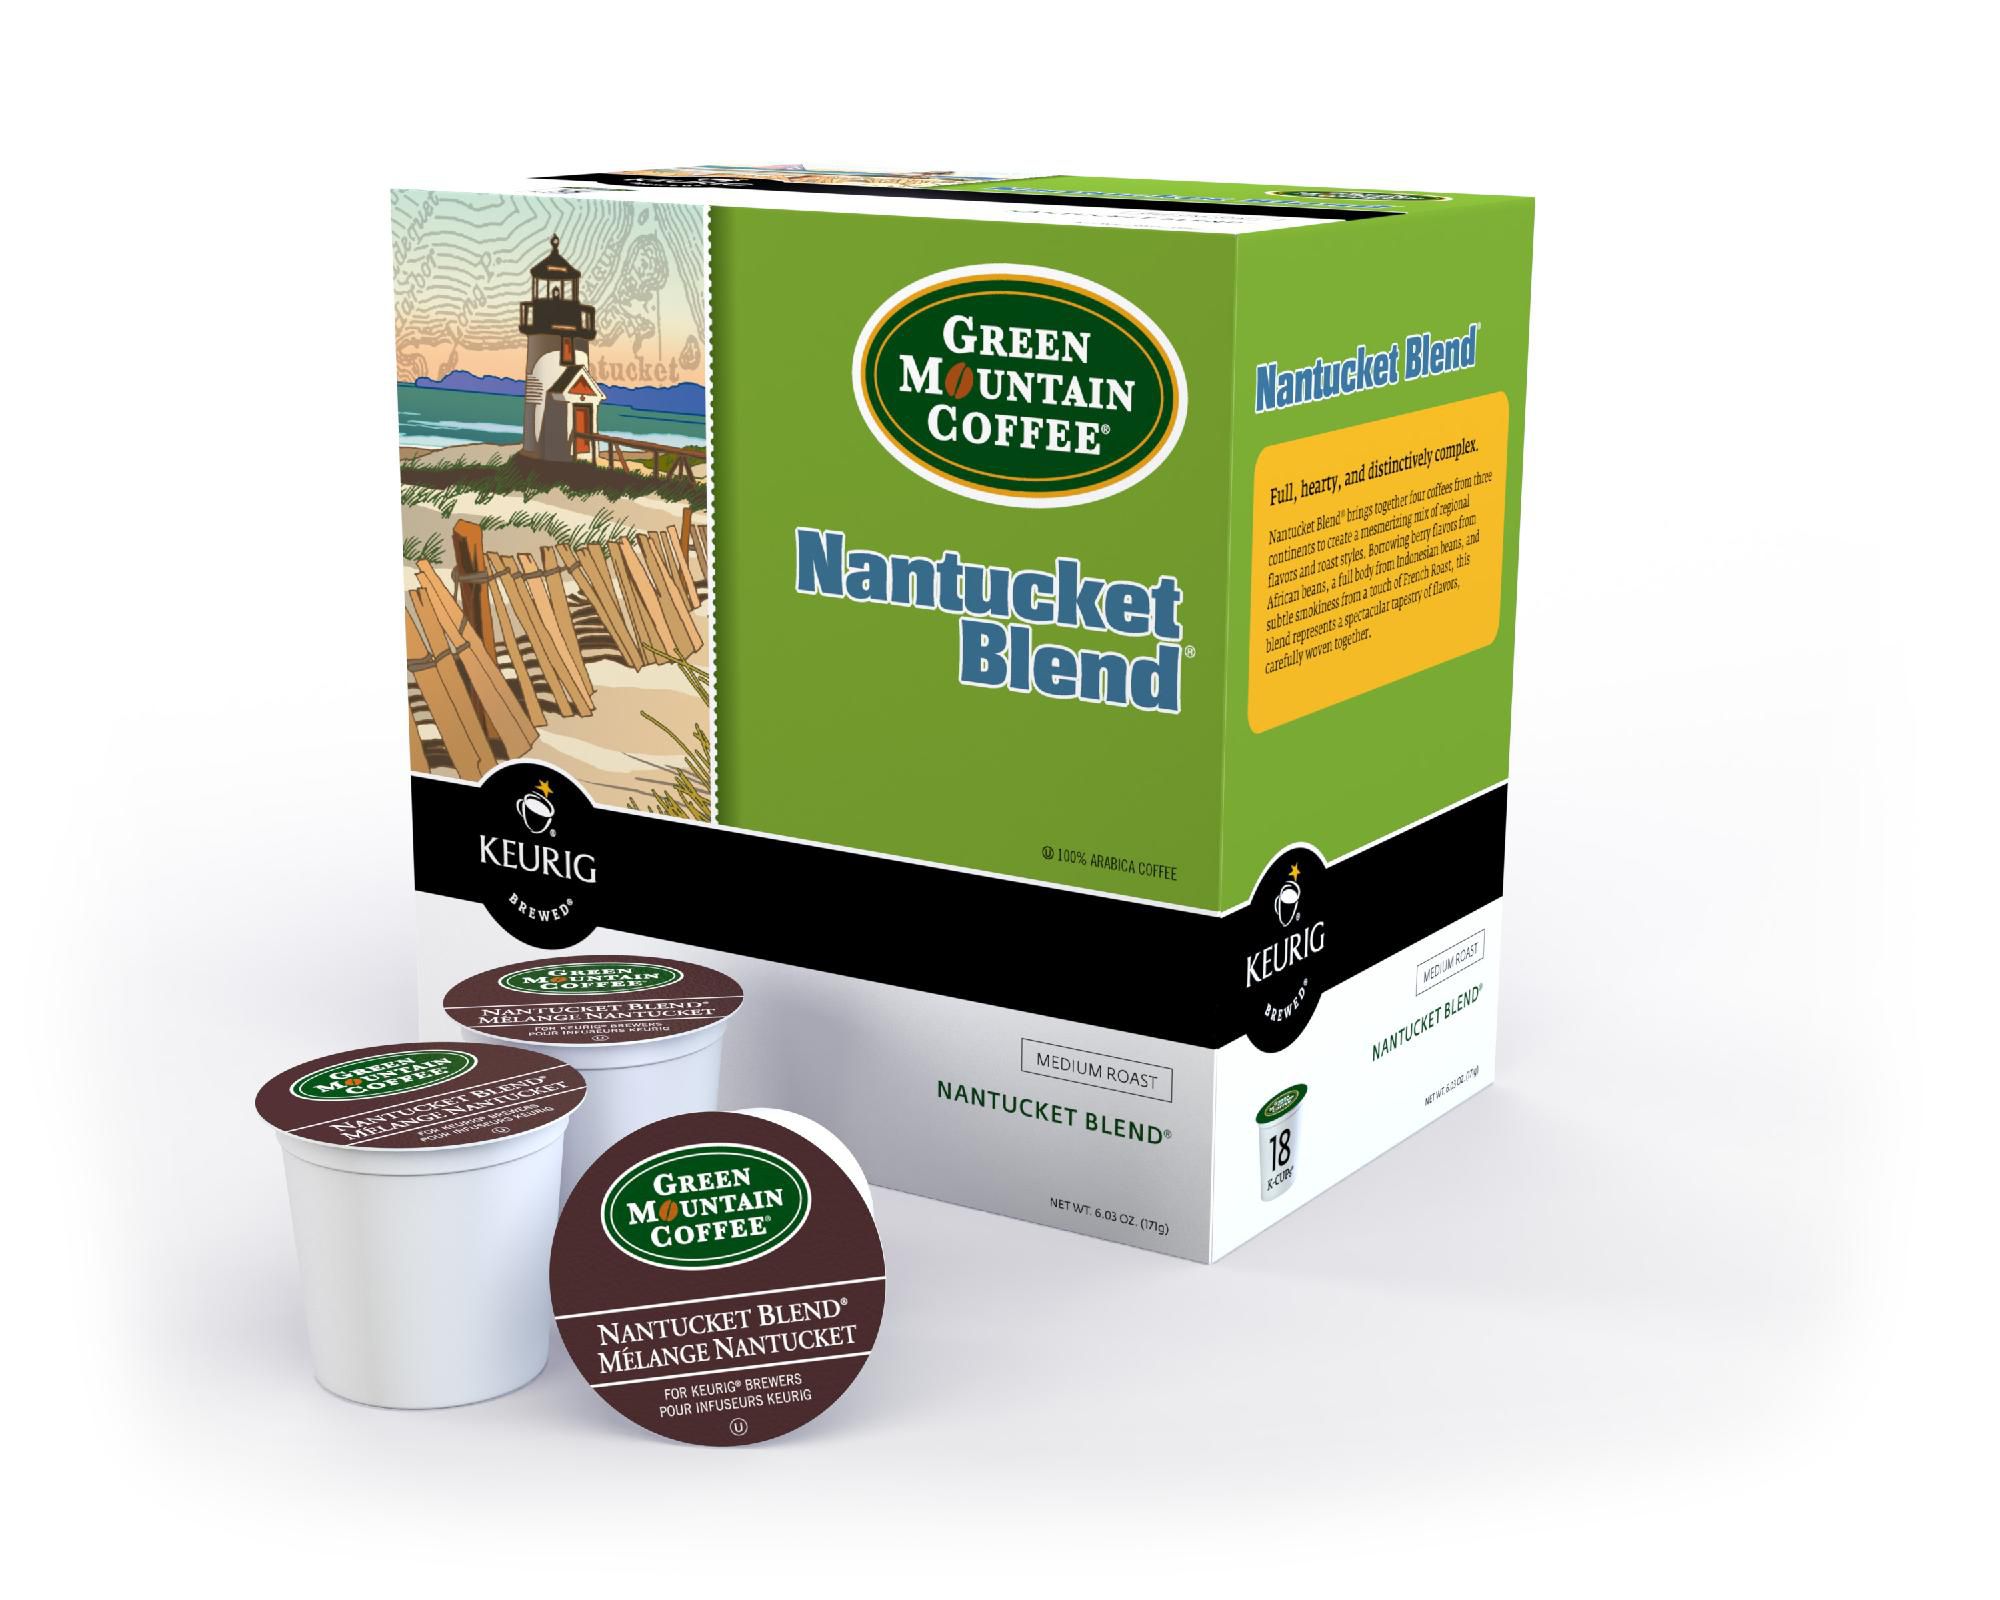 Nantucket Blend For Keurig K-Cup Brewing Systems, 108-pk